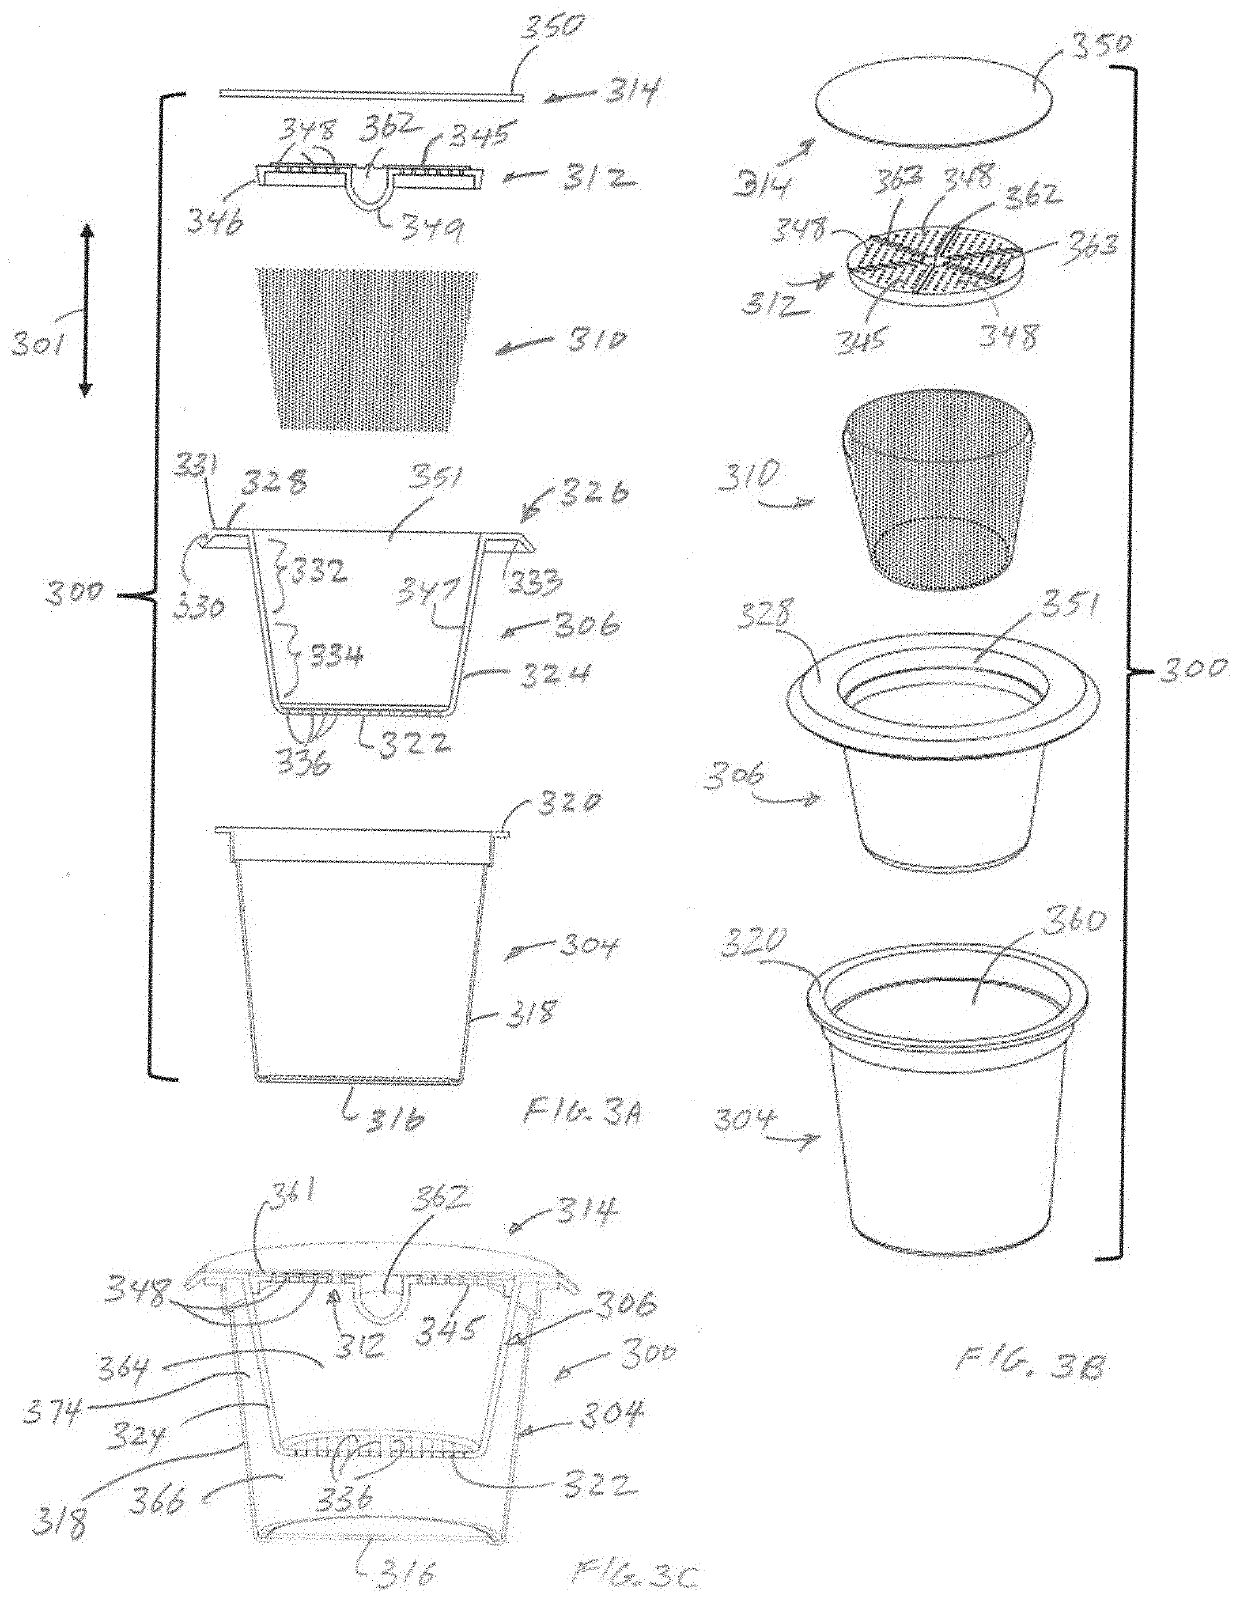 Controlling brewing parameters of single-serve beverage system